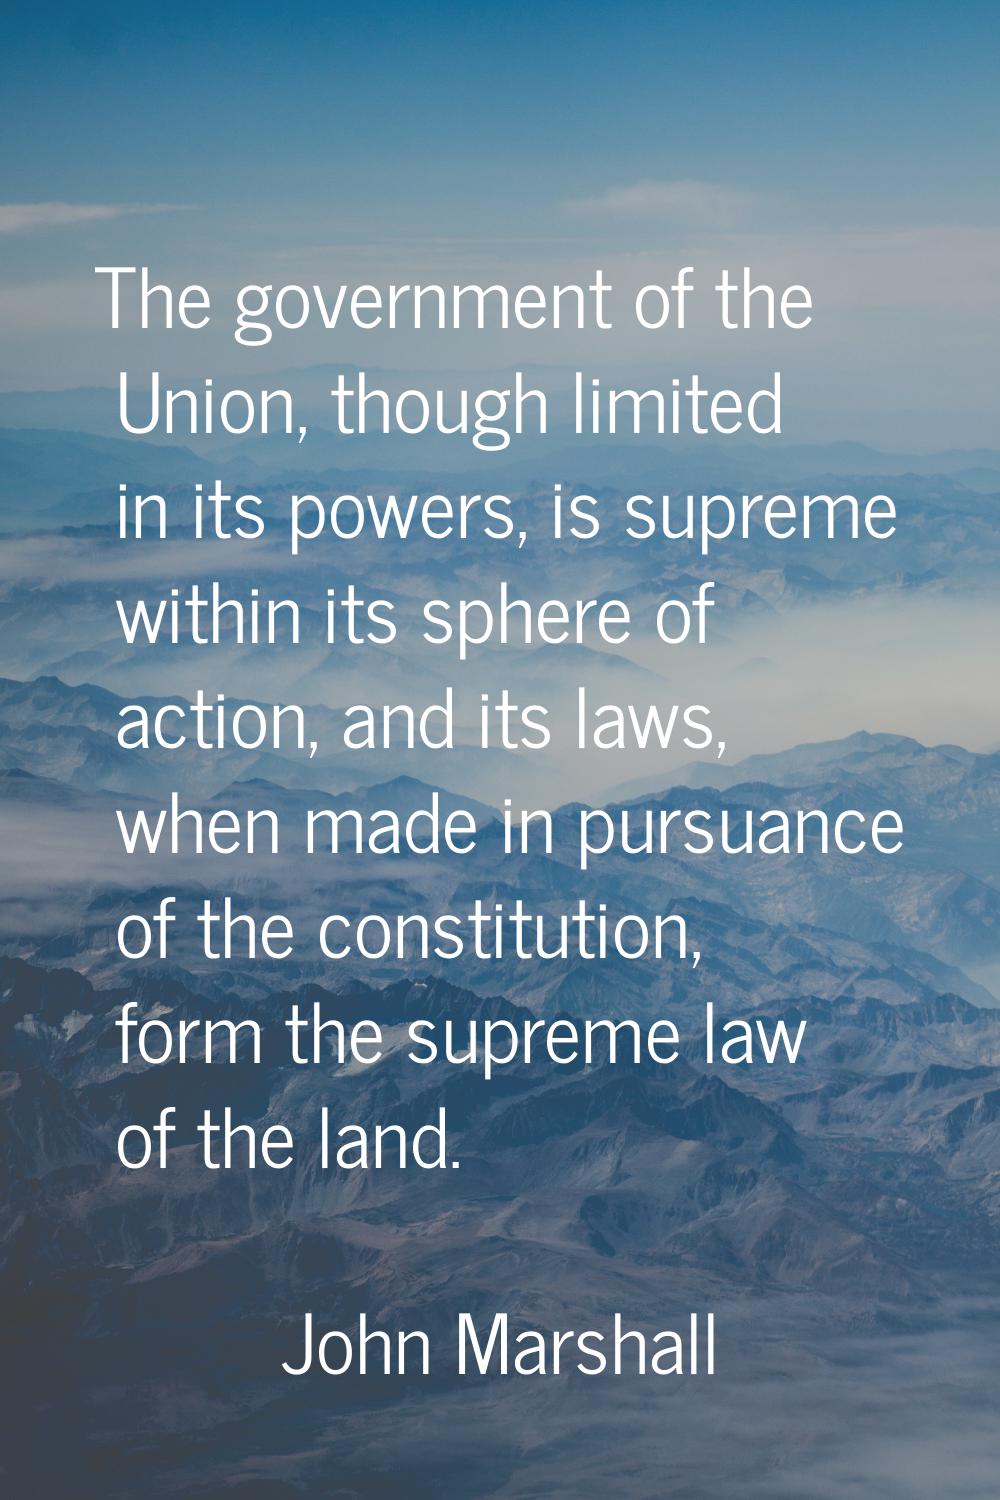 The government of the Union, though limited in its powers, is supreme within its sphere of action, 